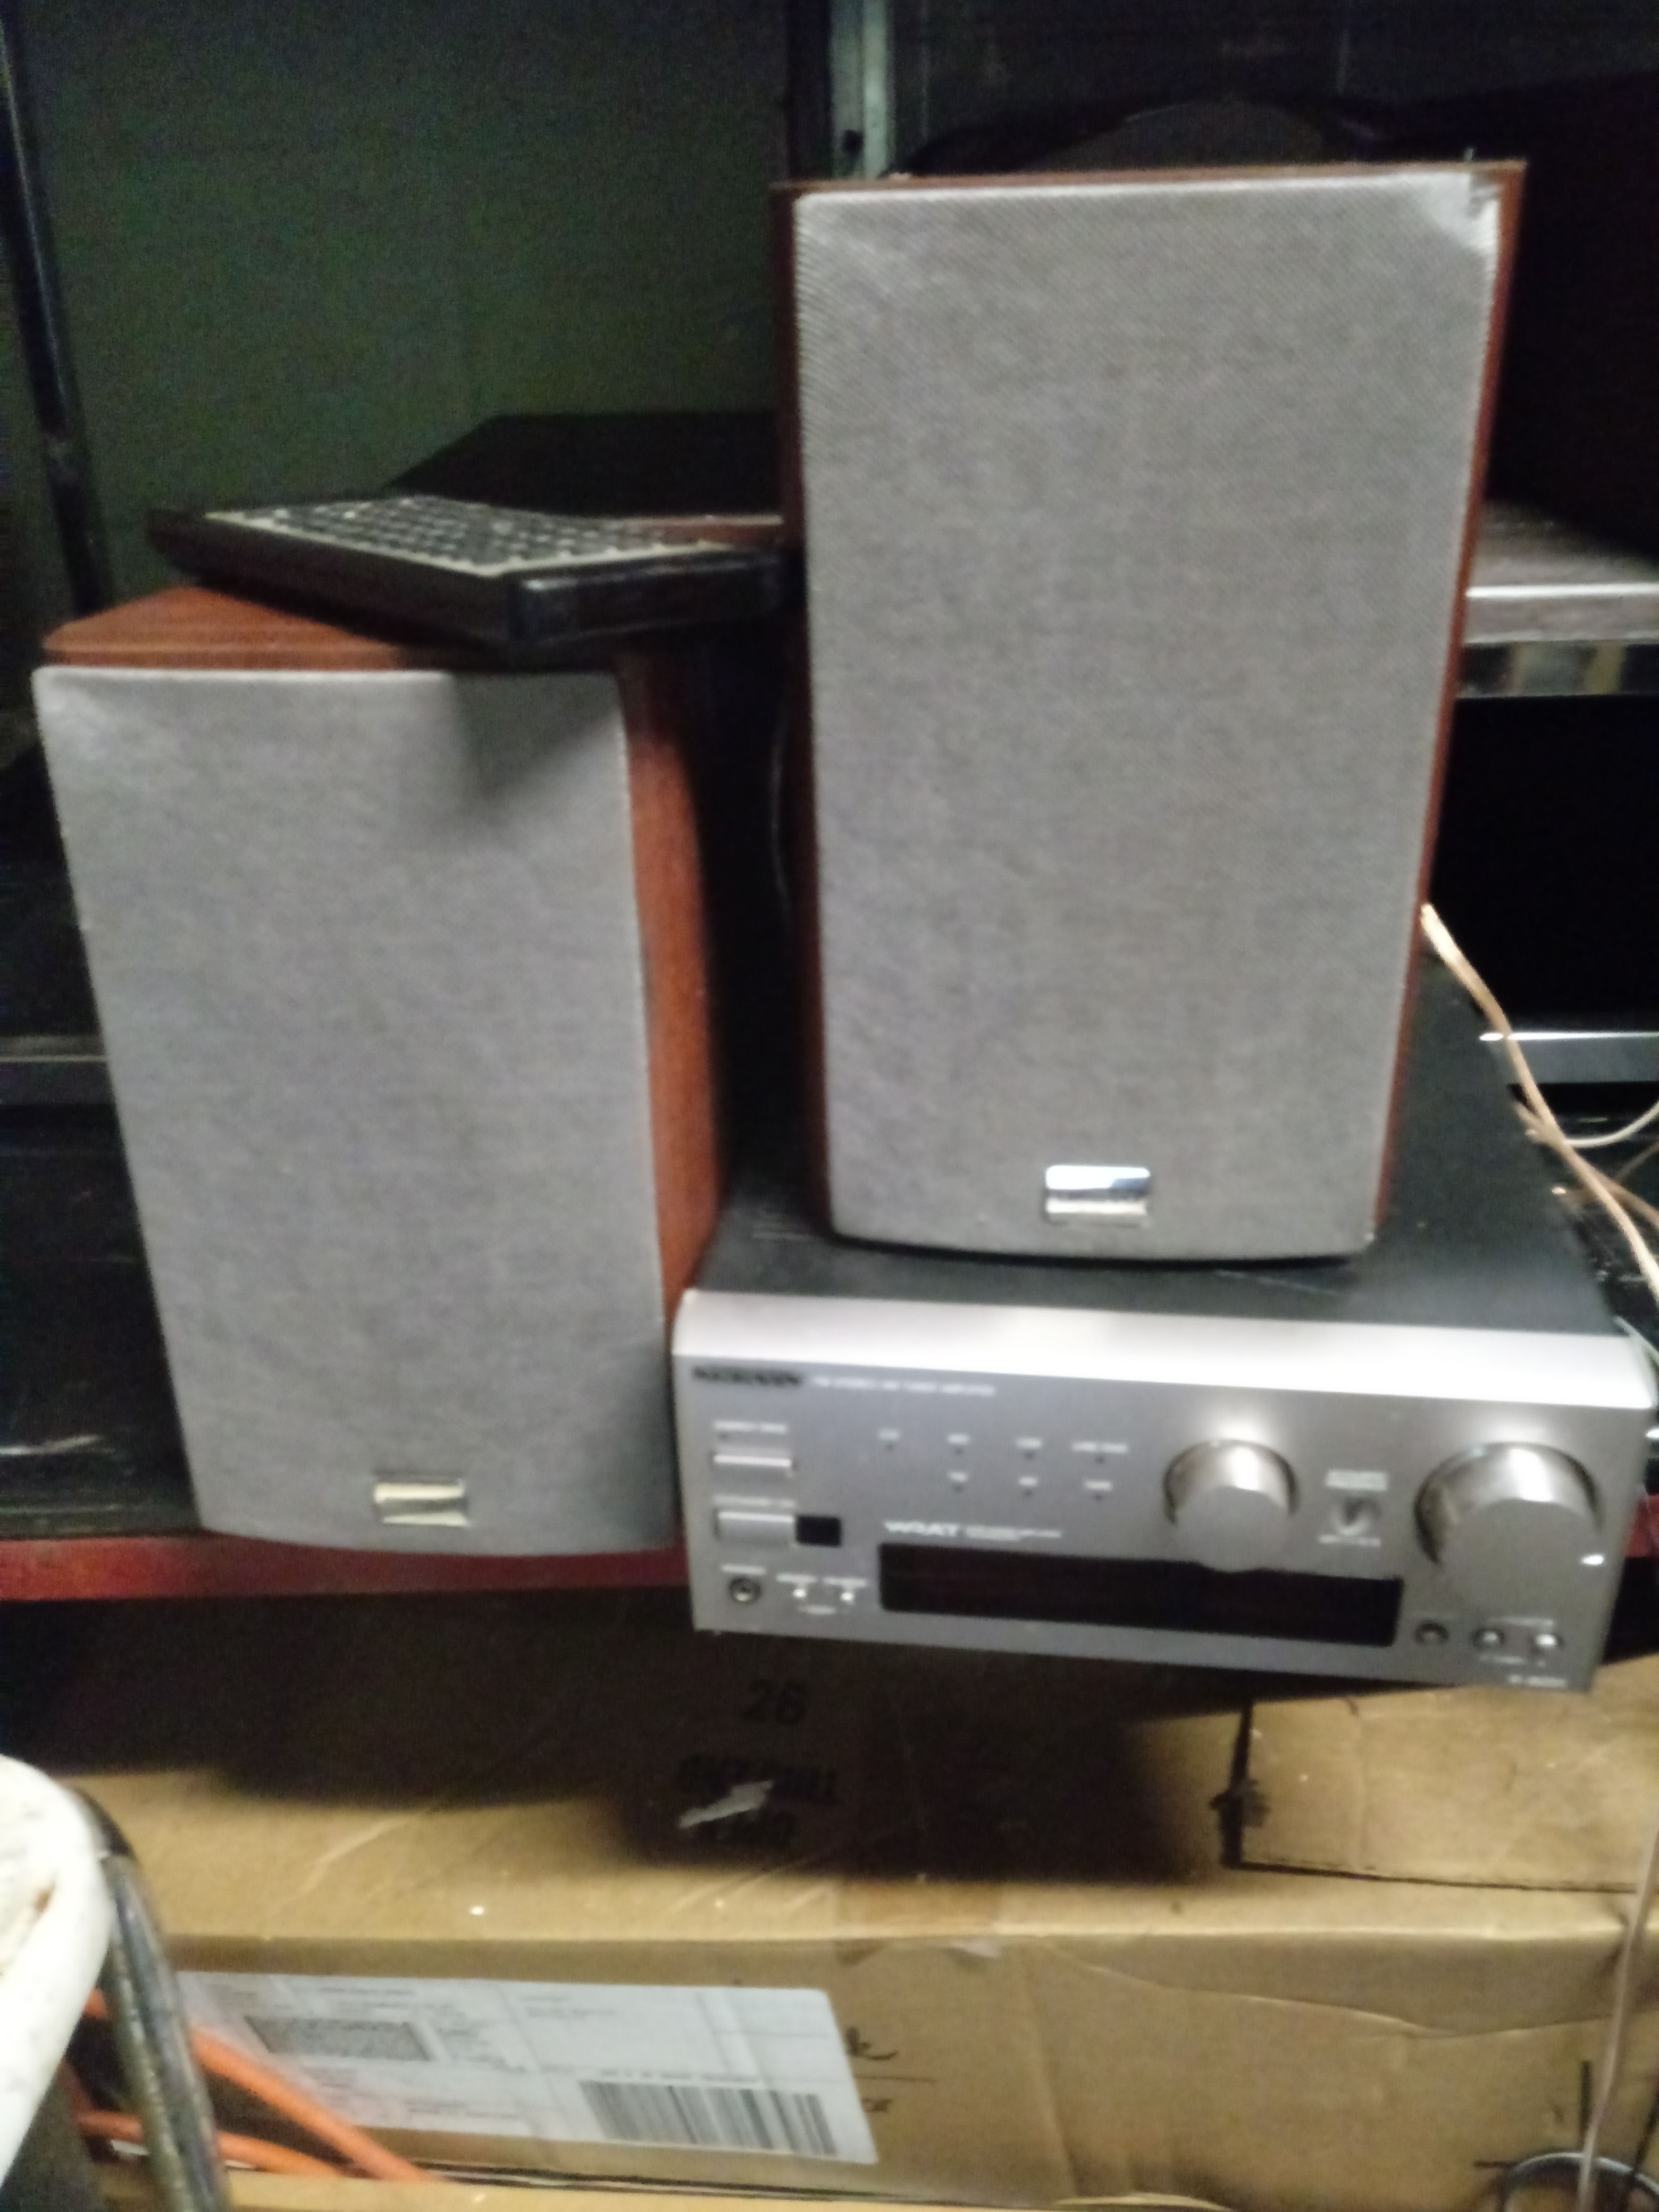 Onkyo Small Stereo Deck with speakers and remote